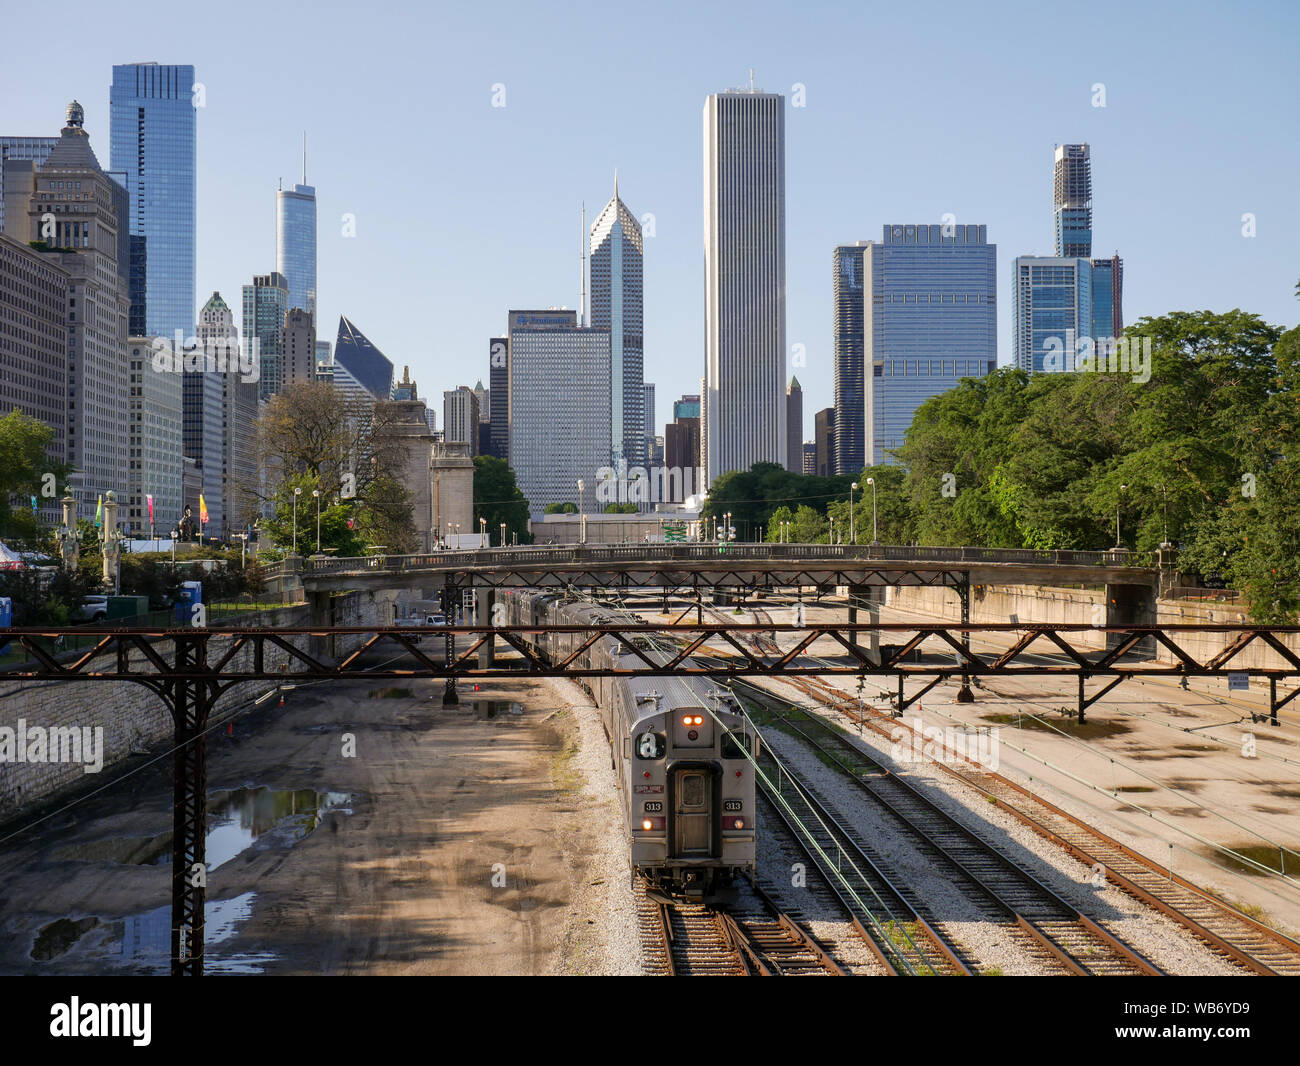 South Shore Line train departing Millennium Station, Chicago, Illinois. Final destination, South Bend, Indiana. Stock Photo